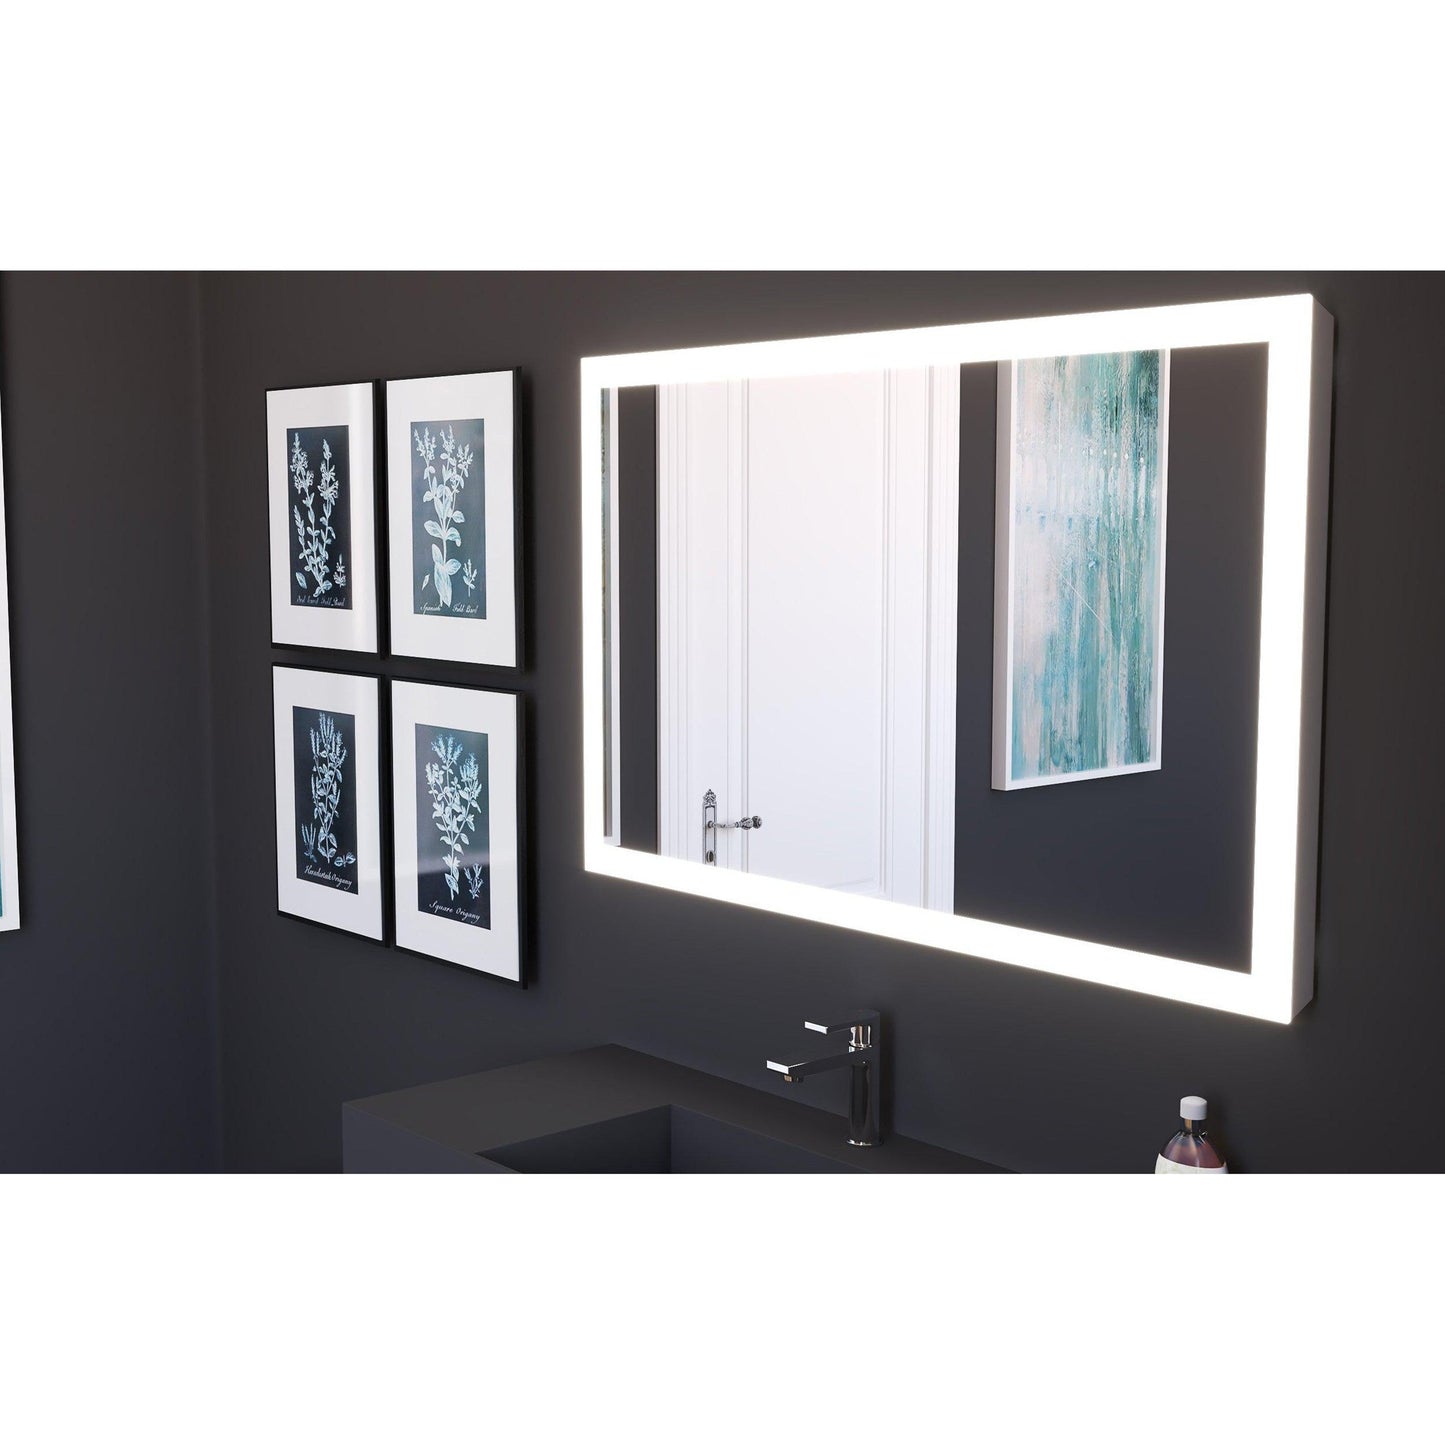 Castello USA Angelina 48" x 30" Dimmable LED Smart Mirror